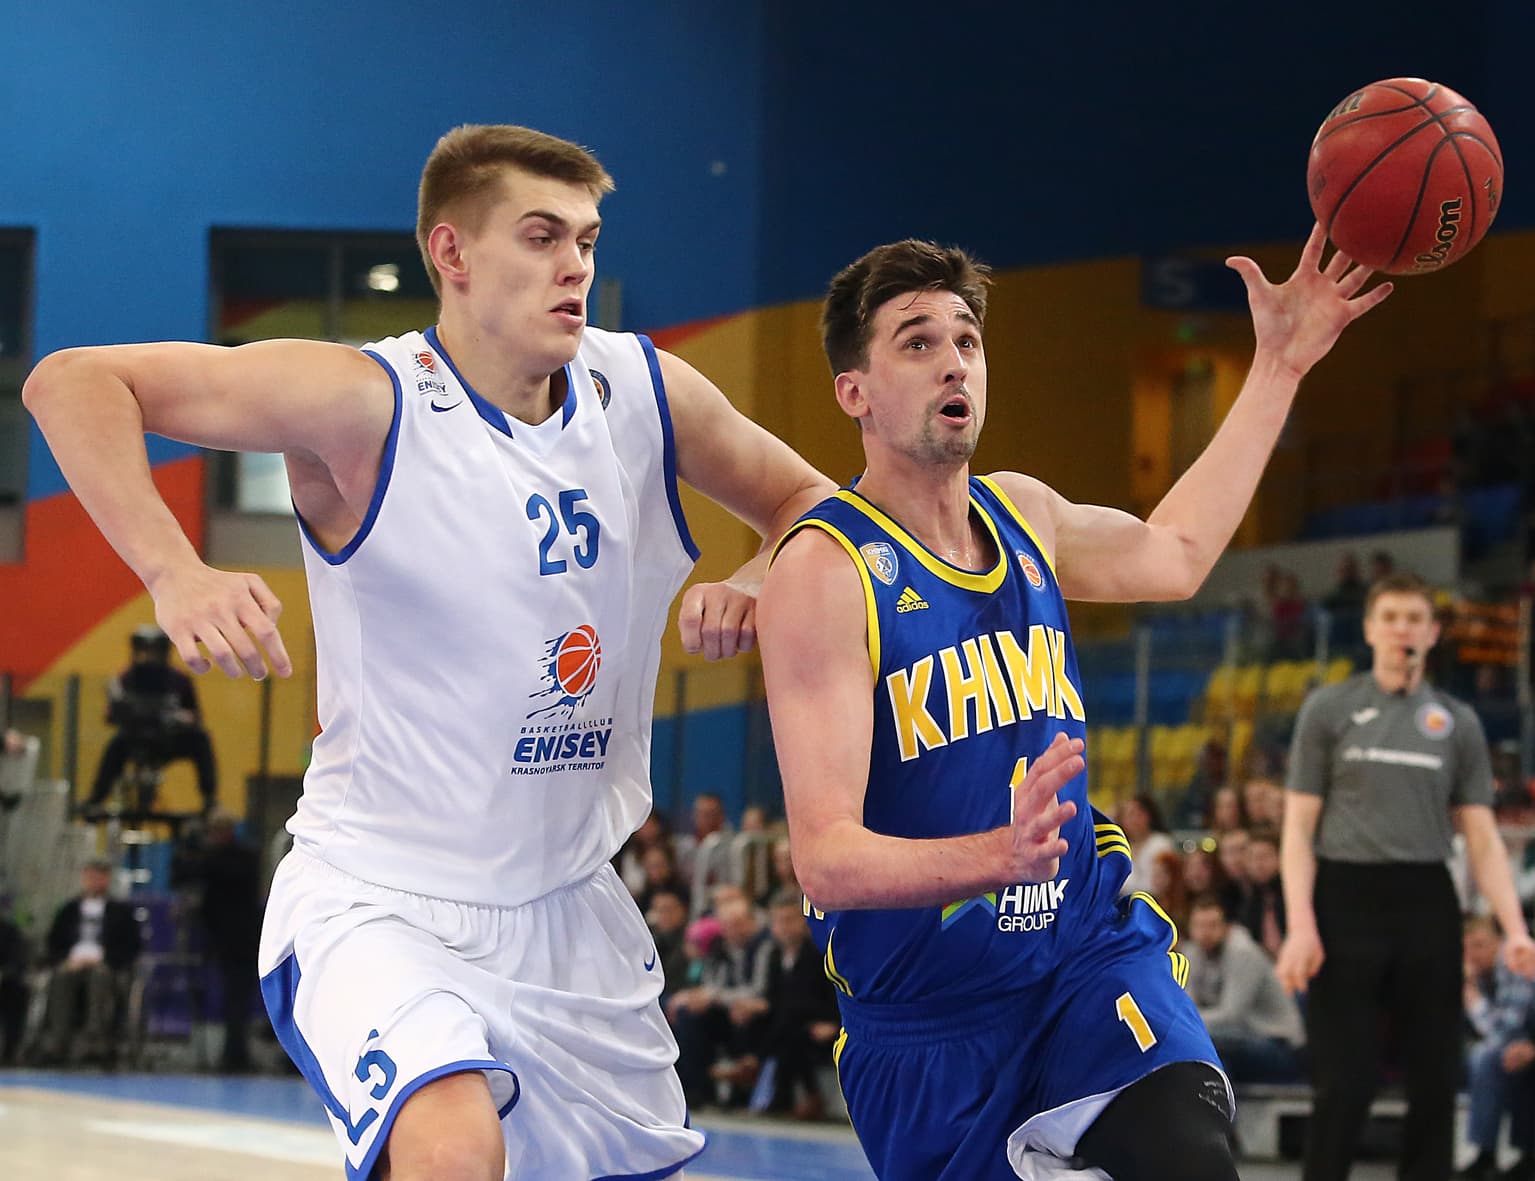 Week In Review: Khimki Takes 3rd, Nick Minnerath Wins Scoring Title And Kevin Jones As Pop Star